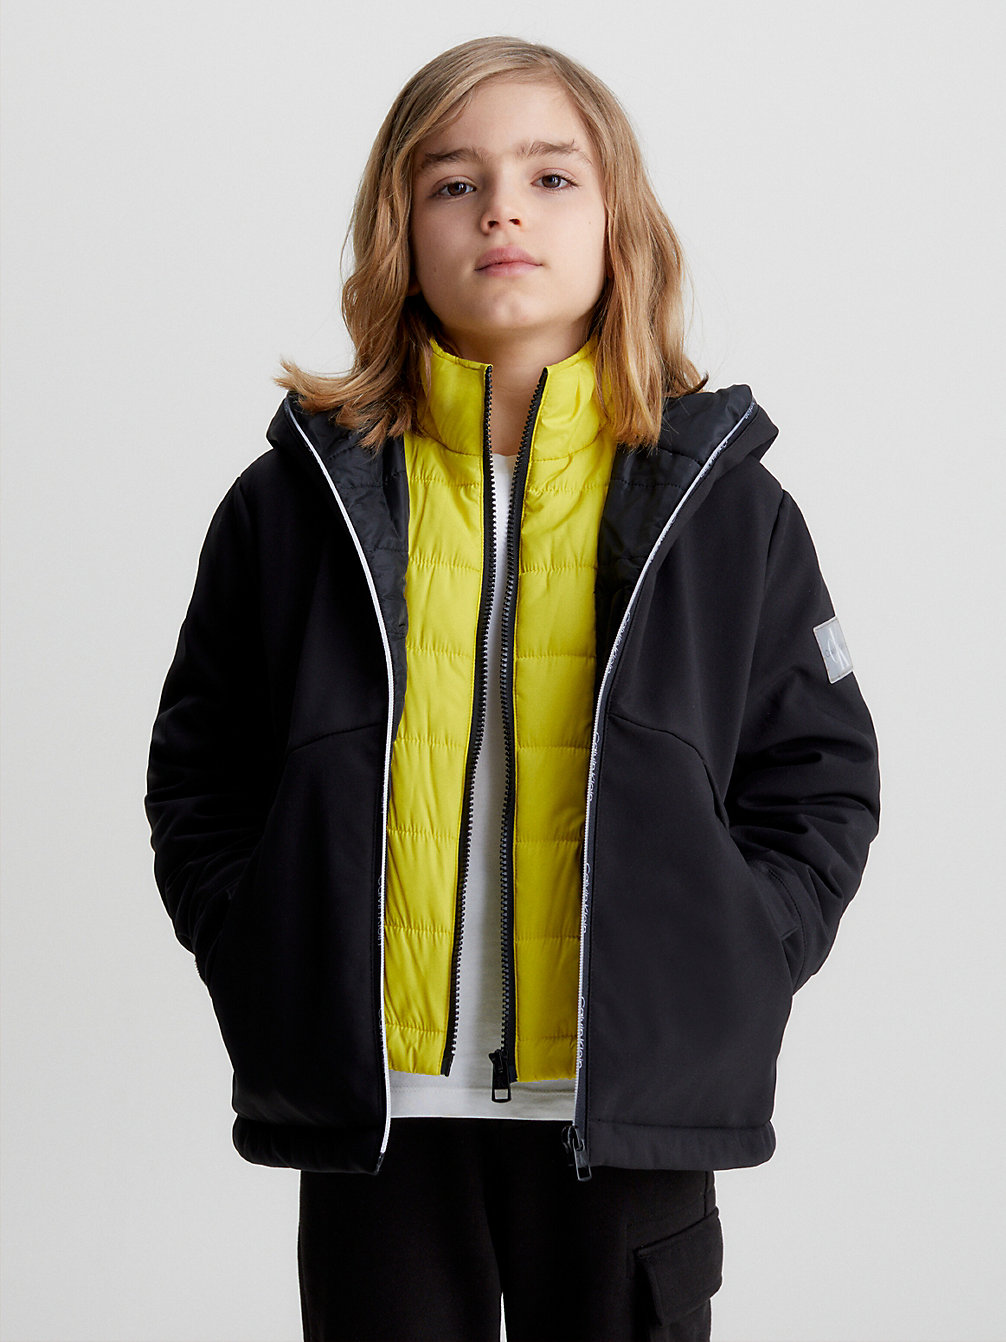 CK BLACK Recycled Polyester Soft Shell Jacket undefined boys Calvin Klein